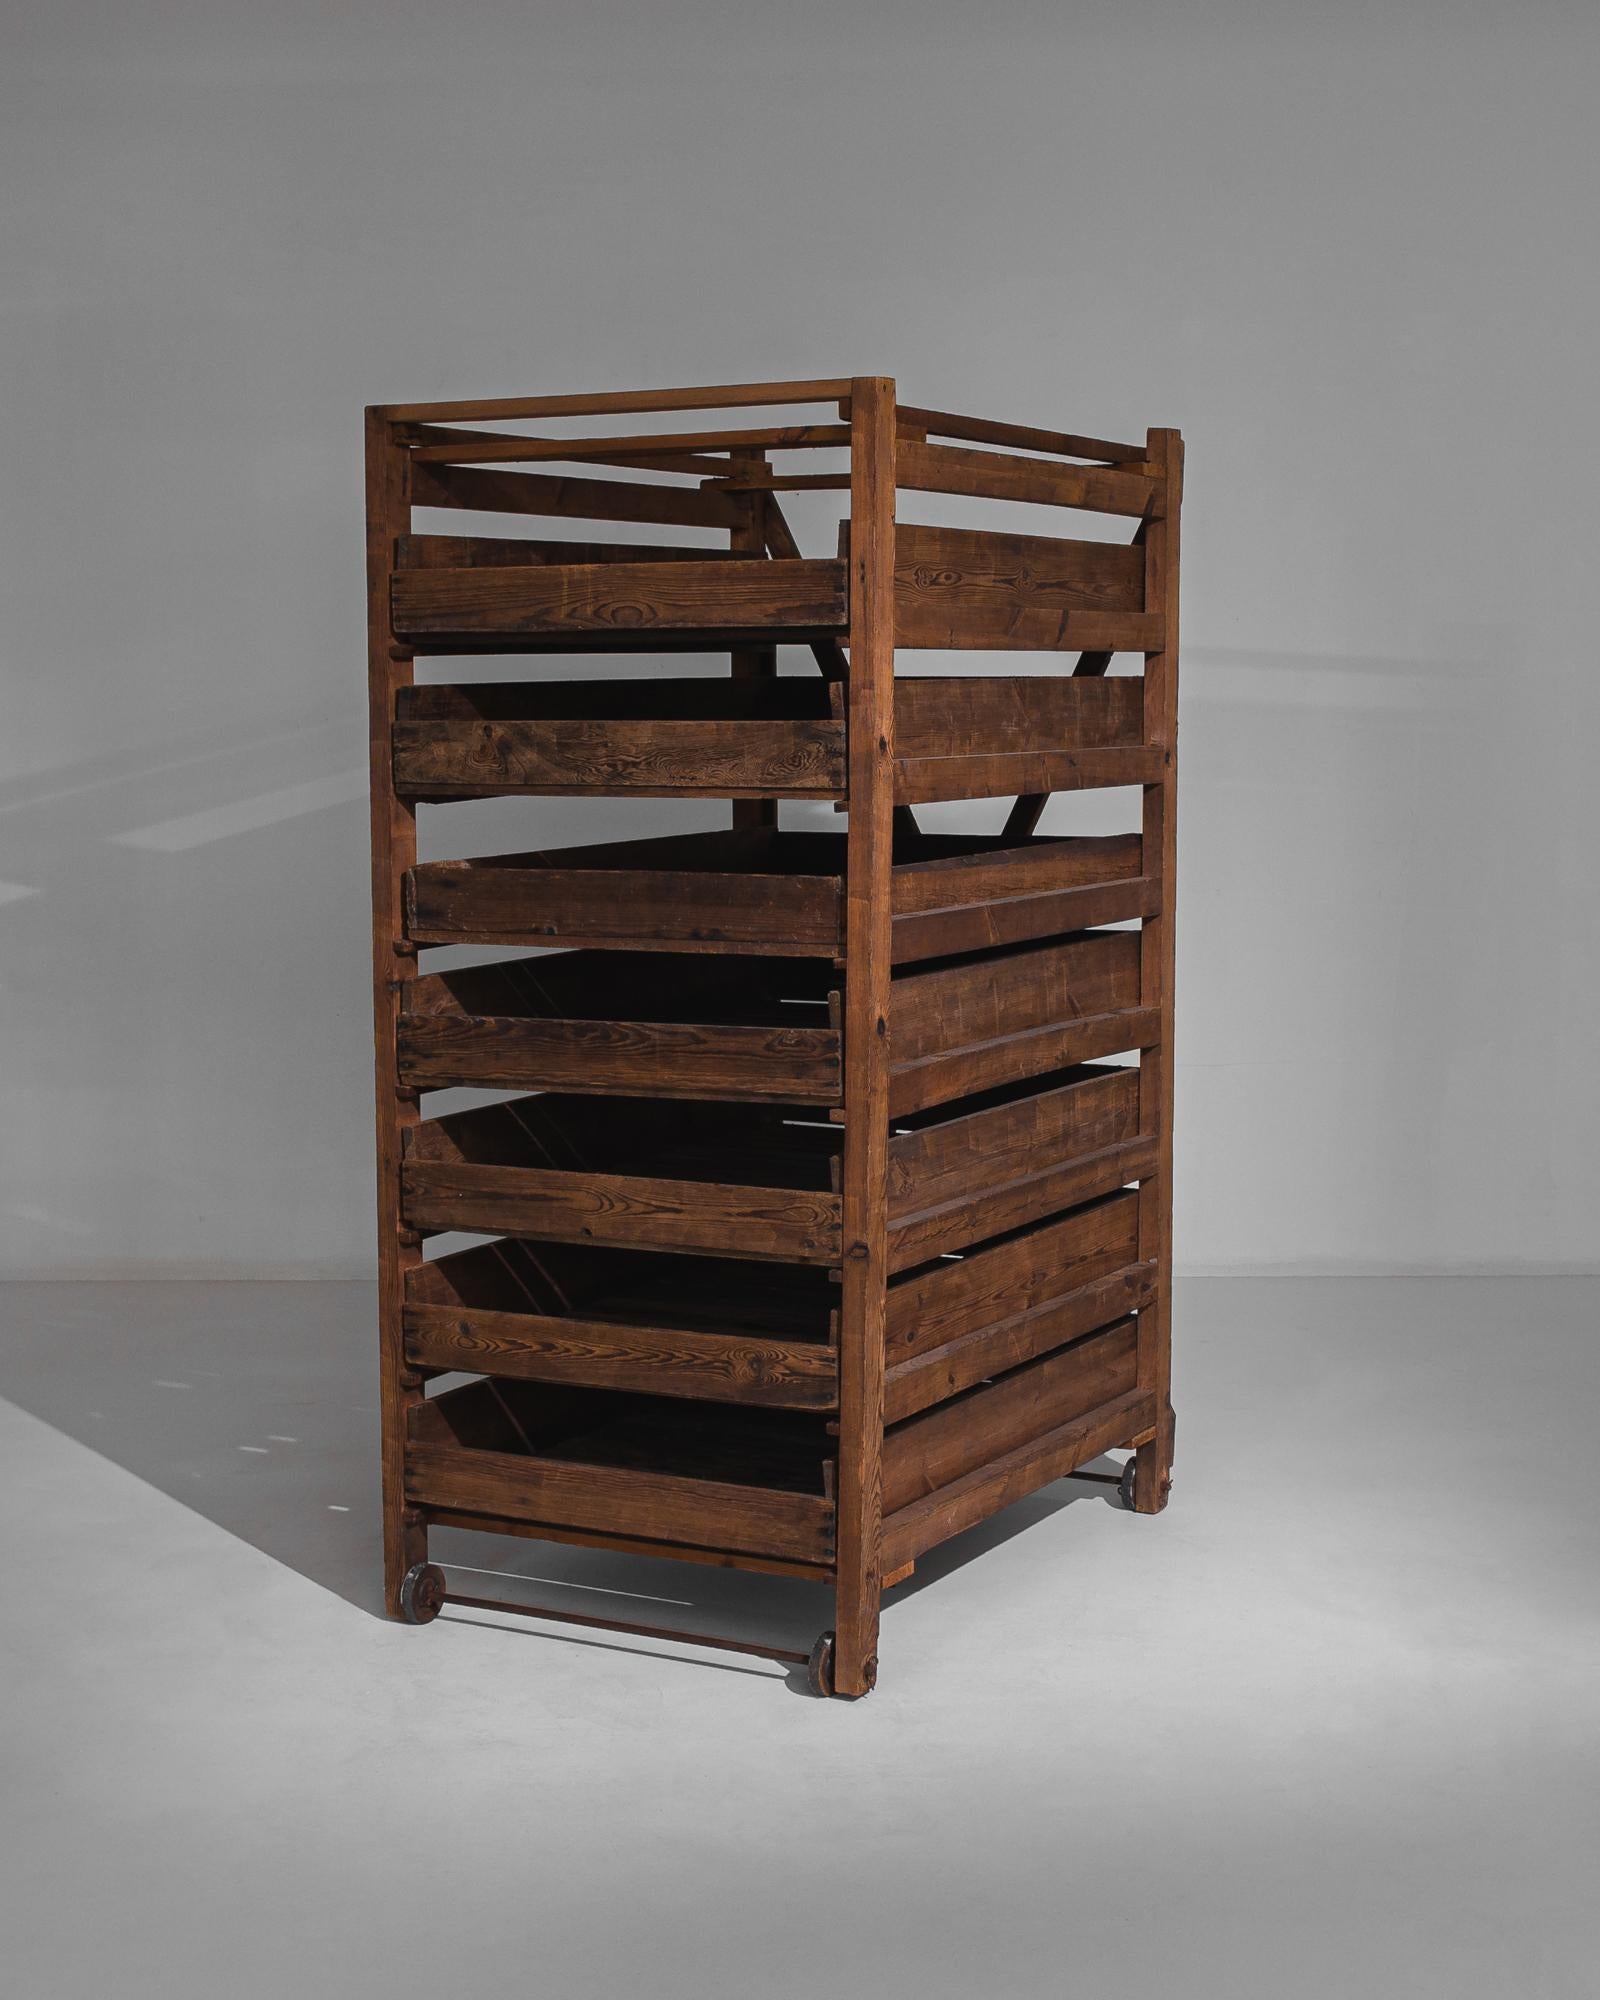 This antique rack of wooden shelves with cast iron wheels was made in France. The pull-out box shelves feature slatted bases and recall the racks used in large kitchens to store vegetables and to dry fruit. It is sturdily constructed with rustic